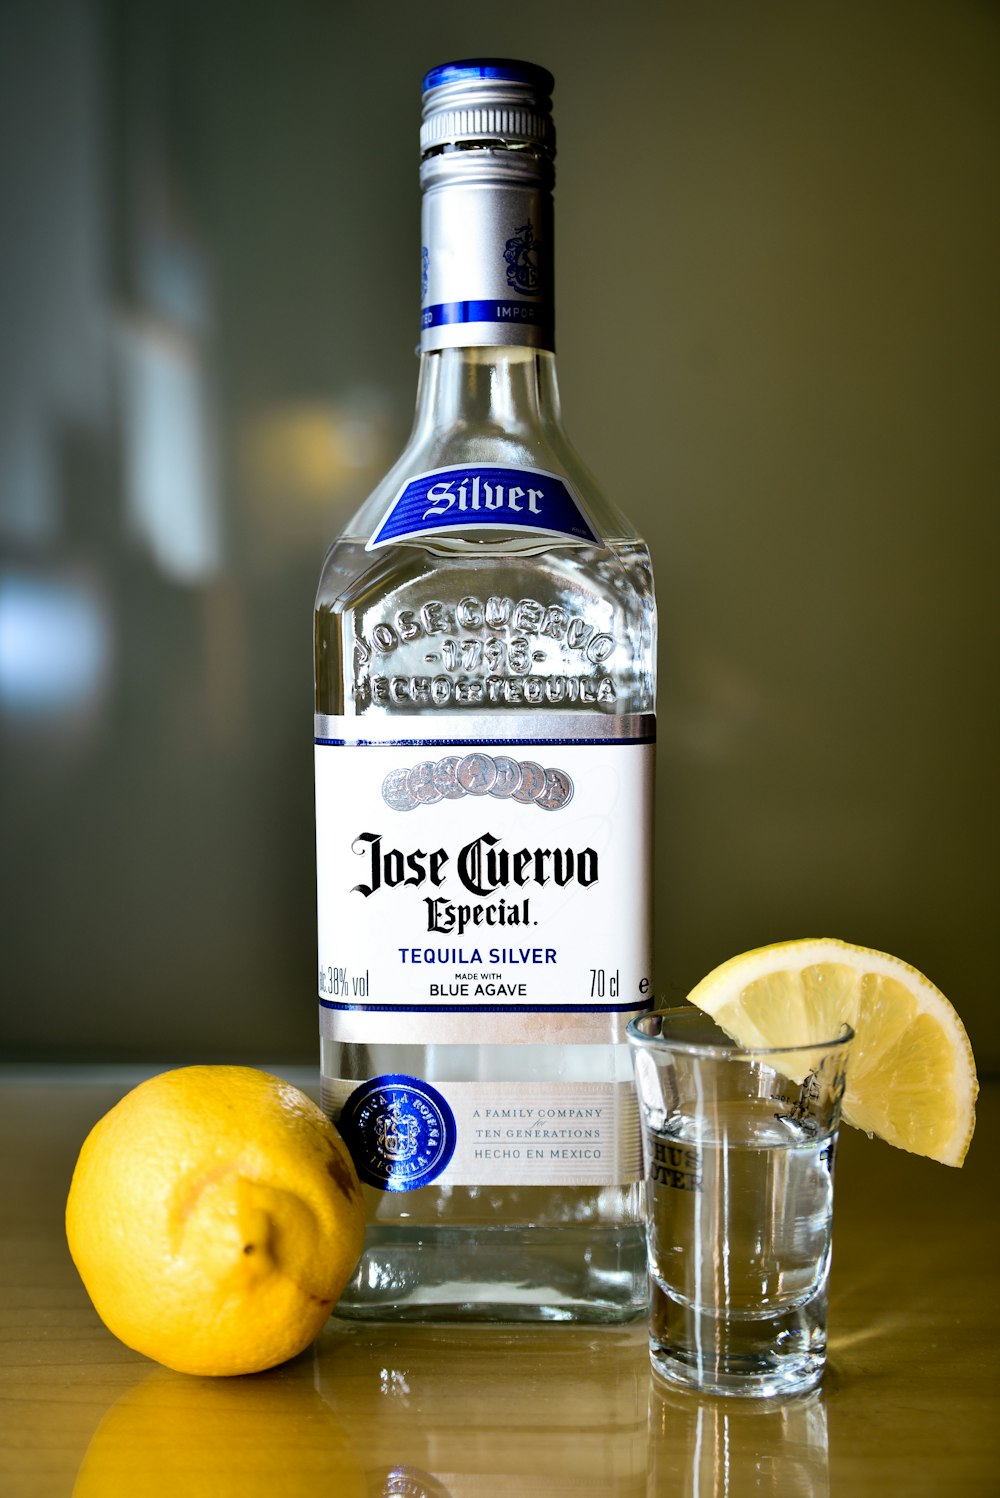 closeup photo of sealed Jose Cuervo tequila silver bottle